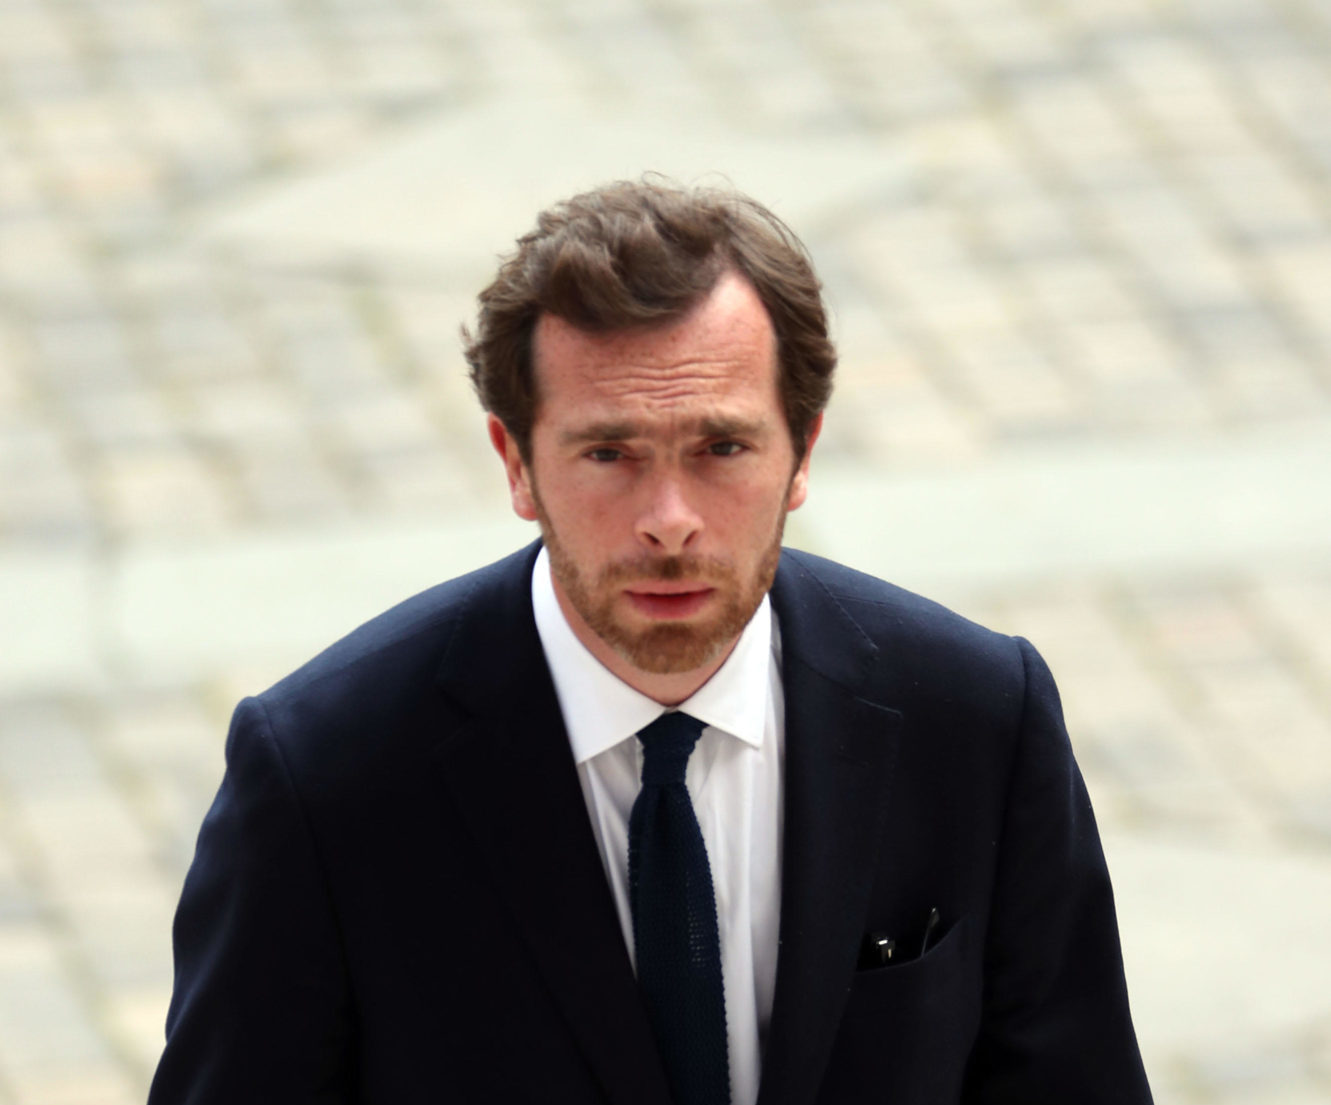 Sophie Toscan du Plantier's son, Pierre-Louis Baudey-Vignaud, arrives at the Court of Appeal in Paris for the trial of Ian Bailey in May 2019